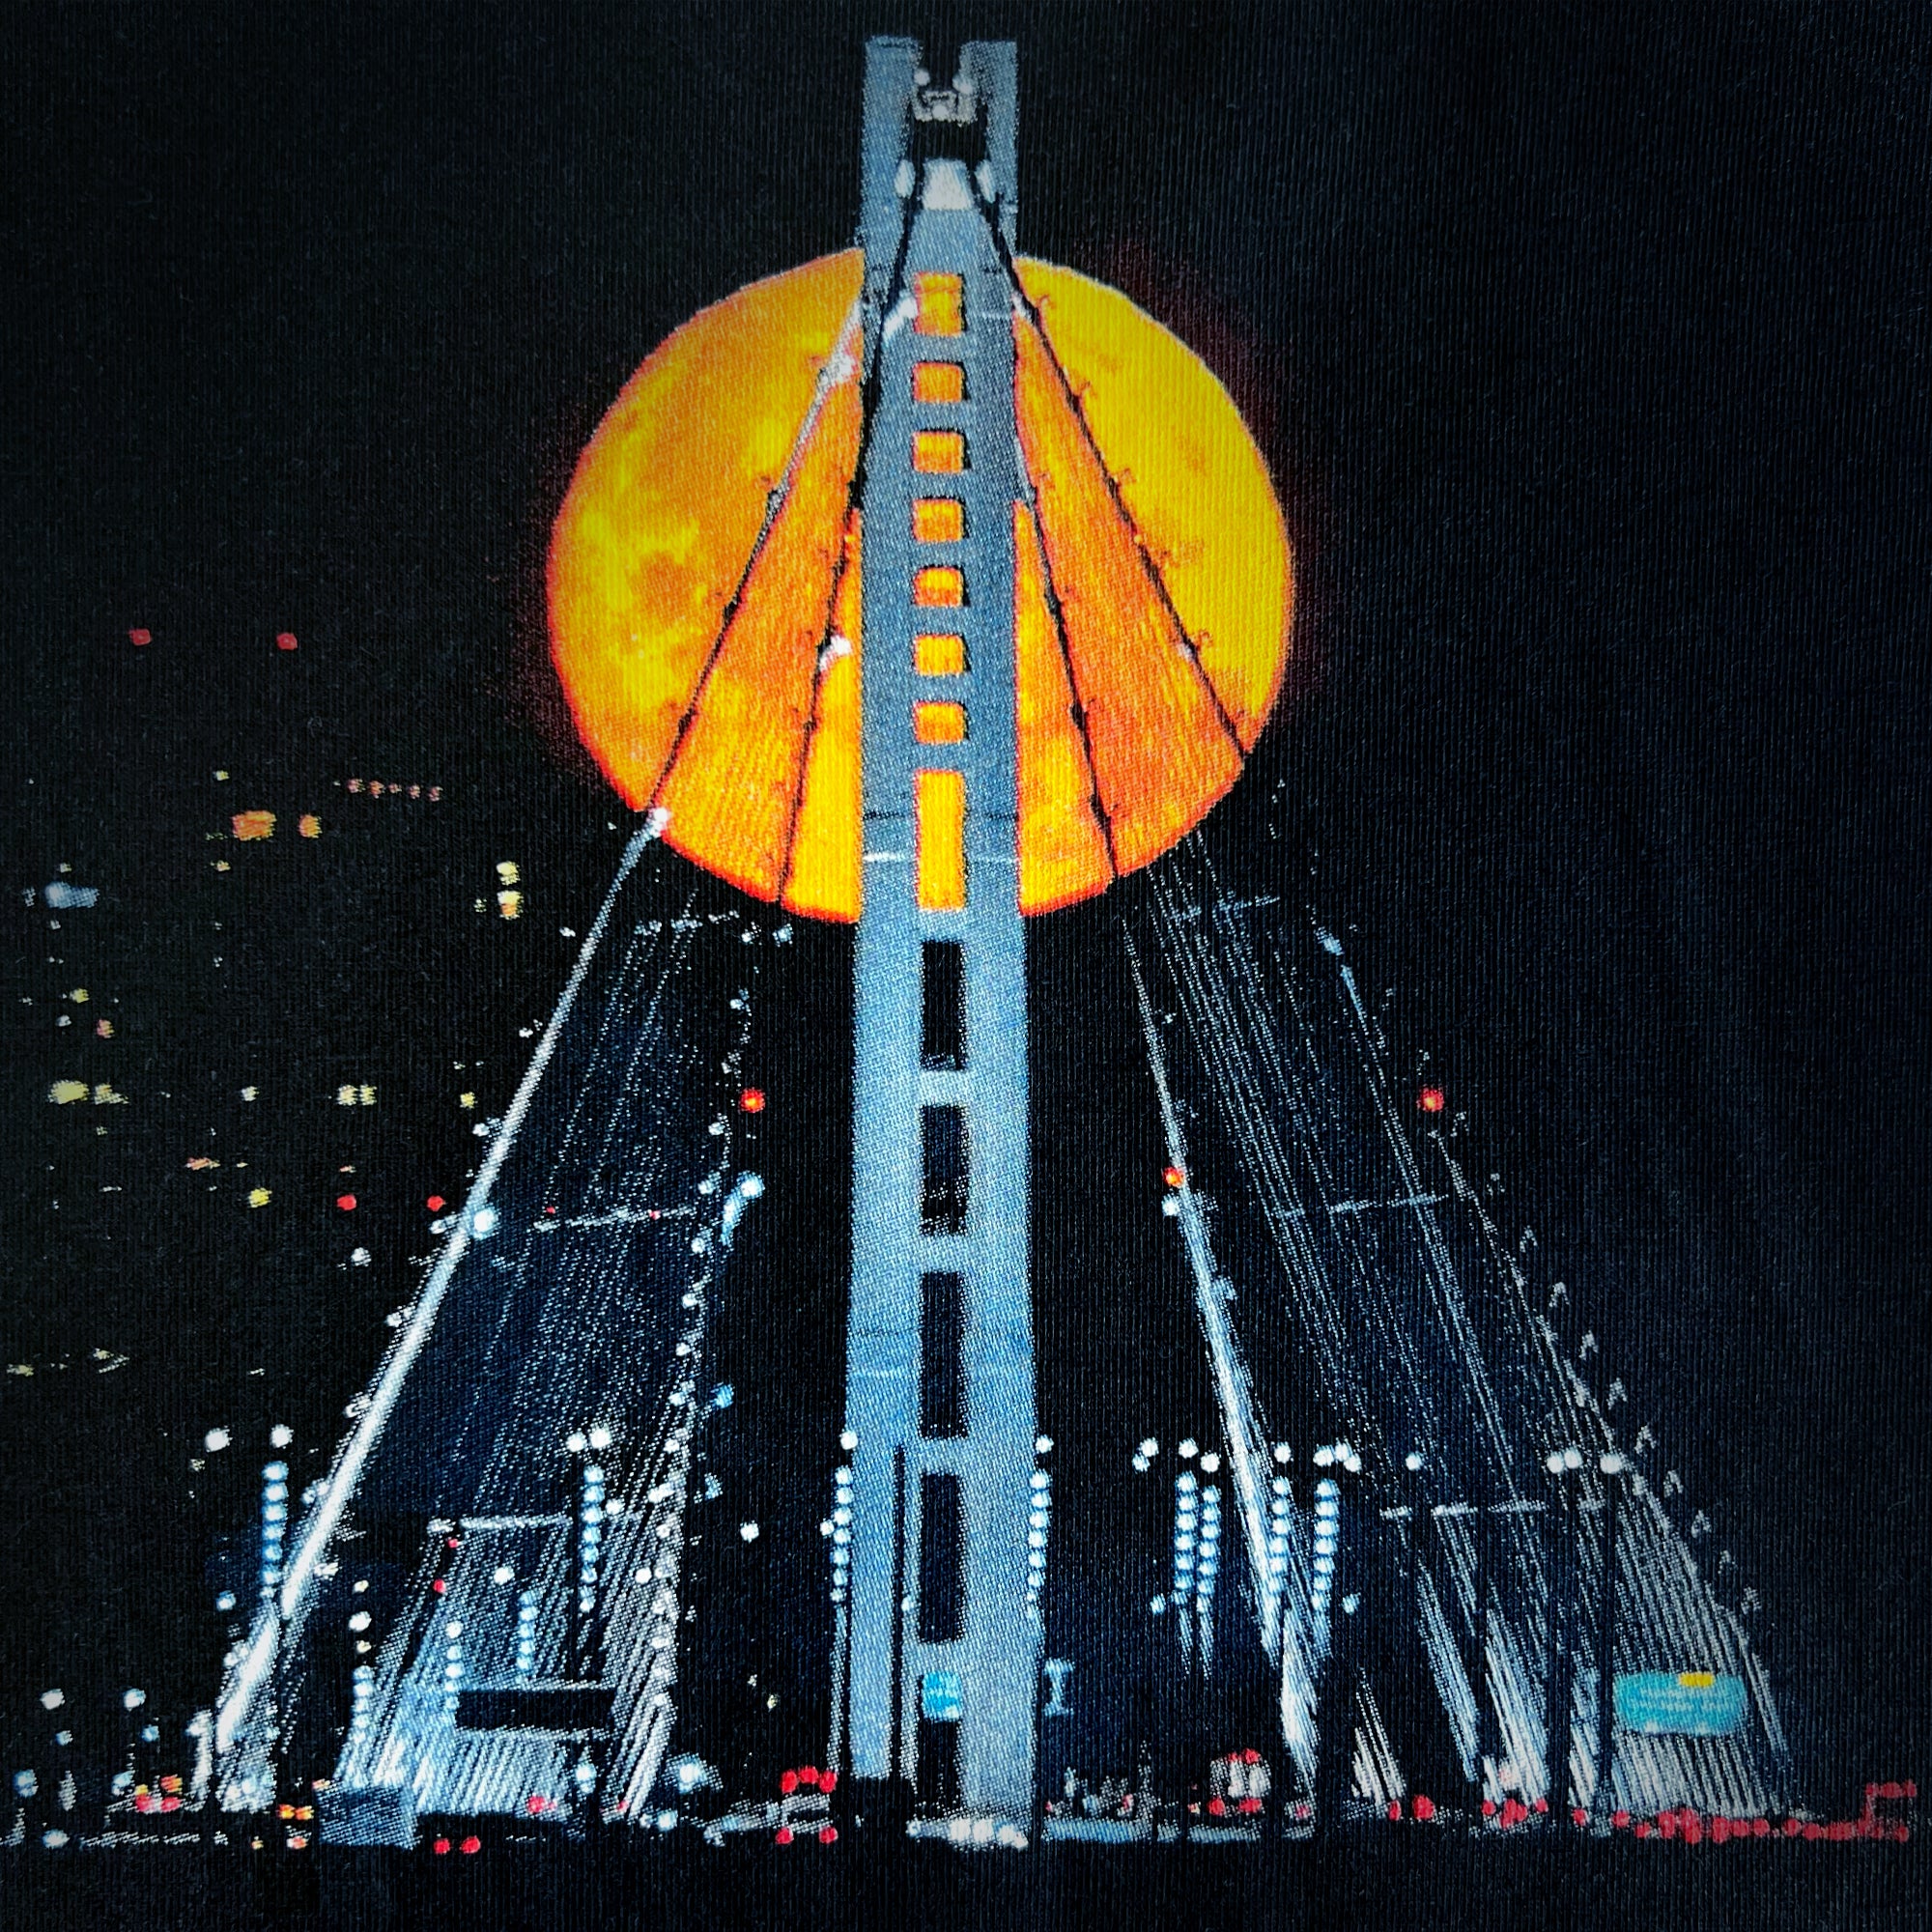 Close-up of the image of Strawberry Moon over the Oakland bridge by landscape photographer Vincent James.